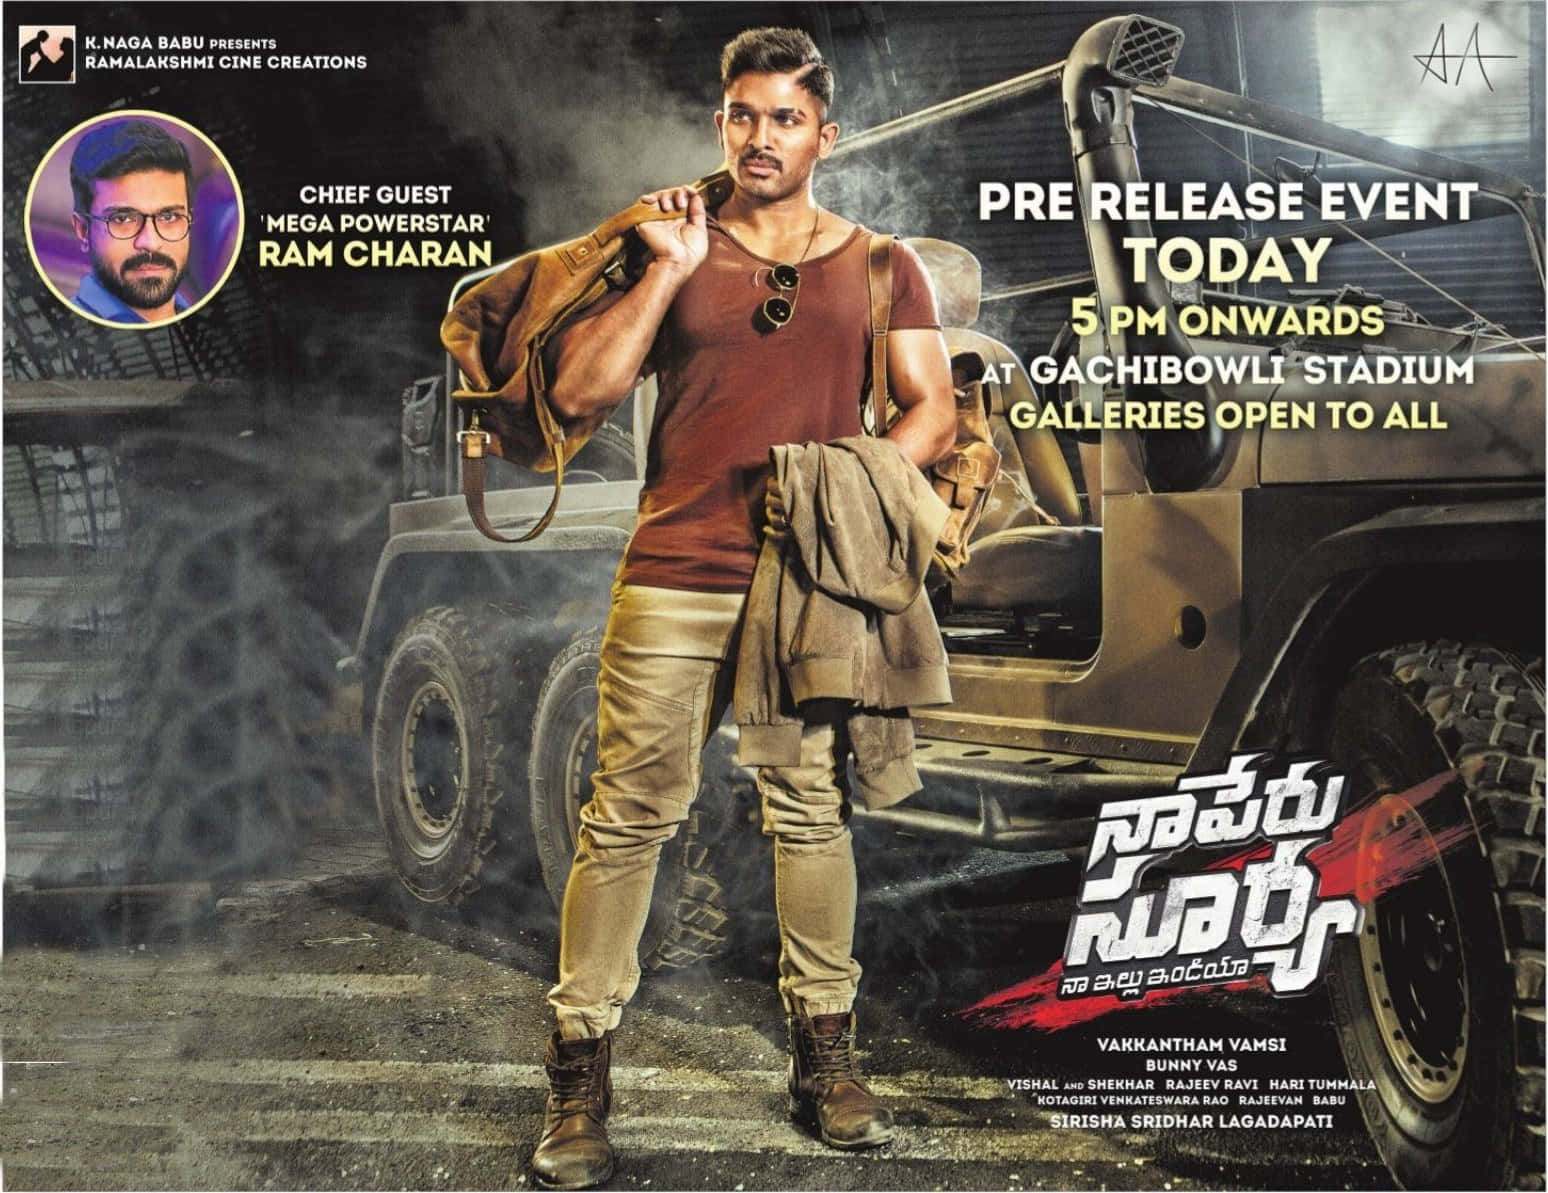 Caption: Surya The Soldier Pre-release Event Poster